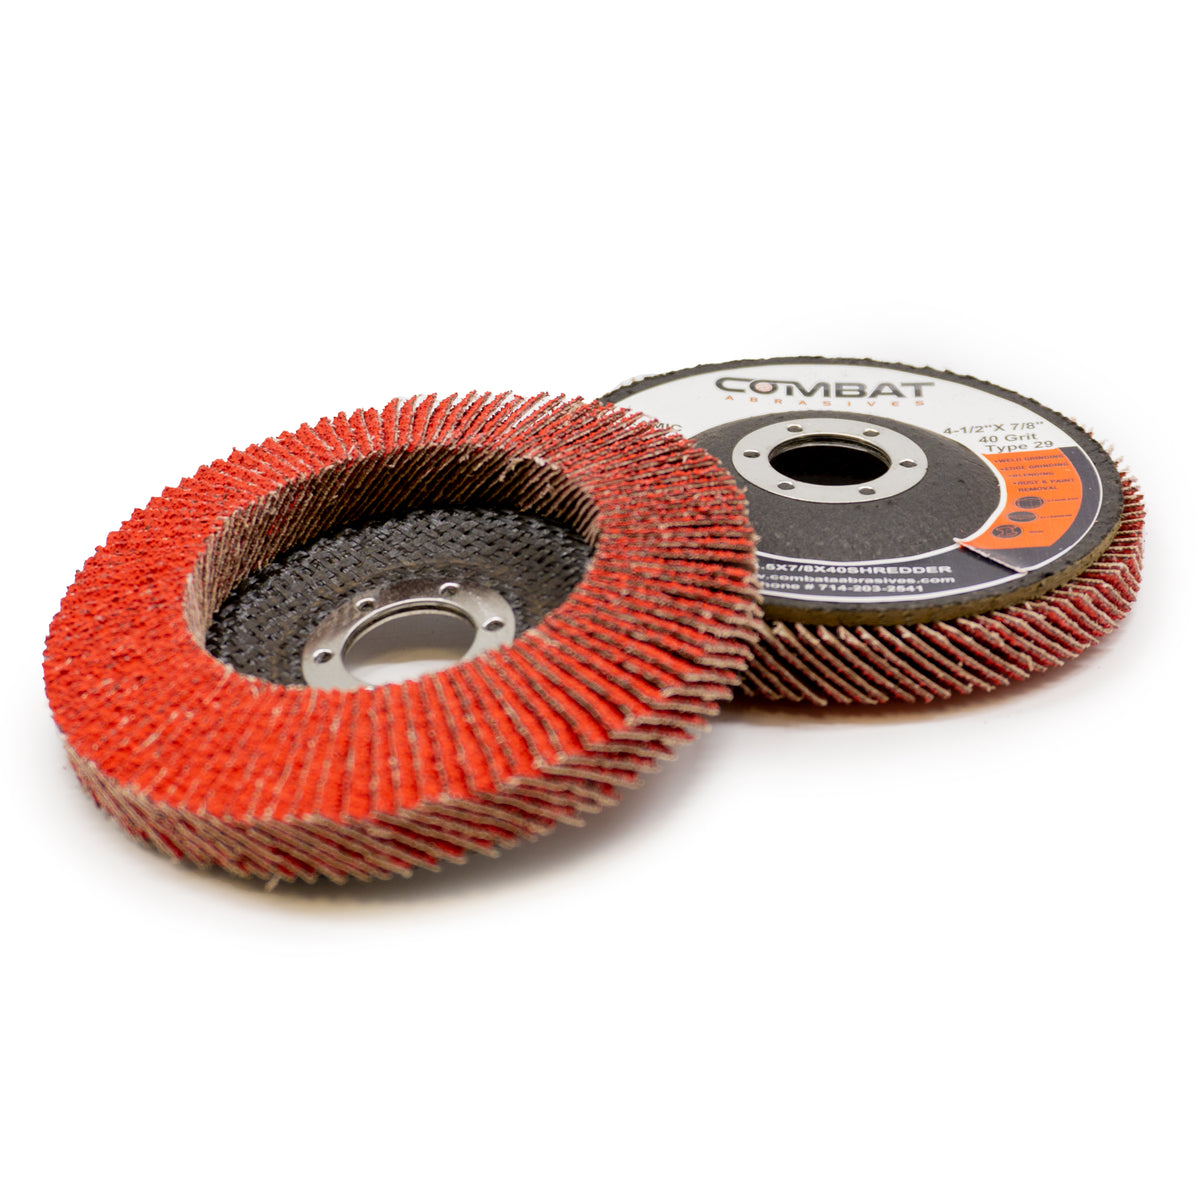 Top and bottom view of Renegade Products USA Ceramic Shredder High Density Flap Discs, sized 4-1/2&quot; x 7/8&quot; (Type 29), with a 40 Grit texture. The image illustrates the robust and dense construction of the discs, emphasizing their quality. Designed for demanding grinding and polishing tasks, these high-density flap discs offer consistent performance and durability for metalworking applications.